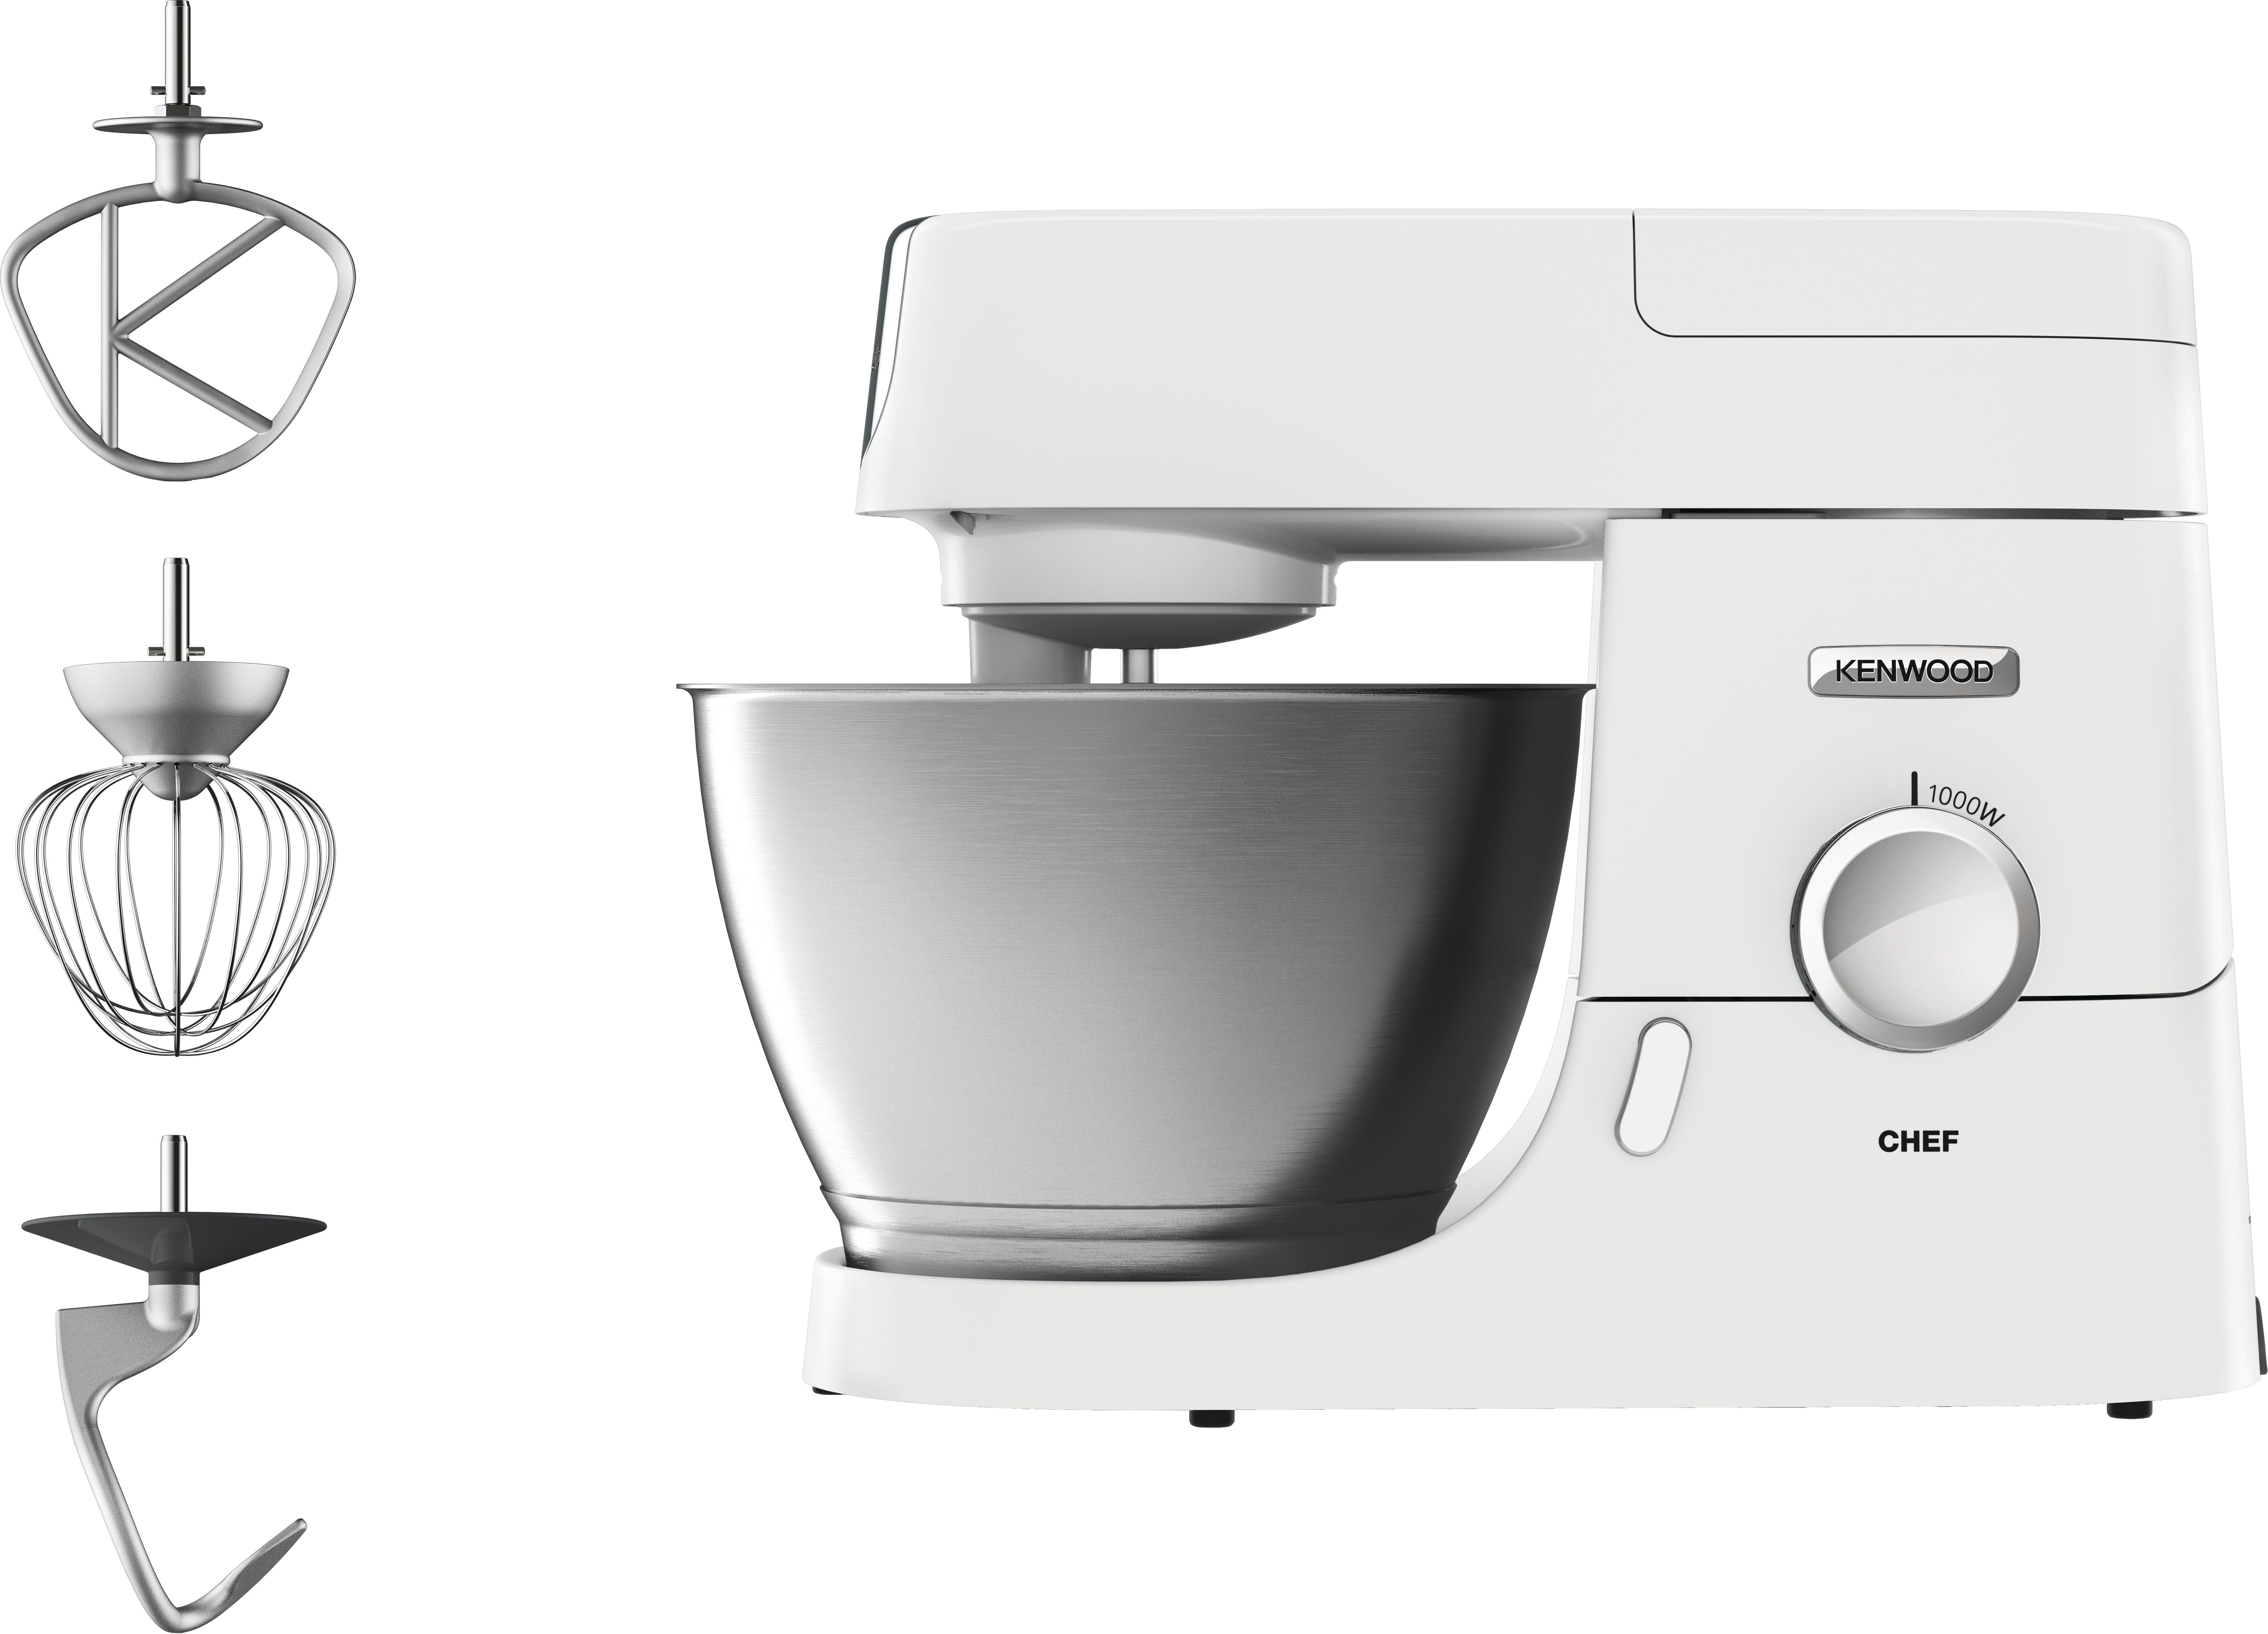 Kenwood Chef KVC3100W Stand Mixer with 4.6 Litre Bowl - White